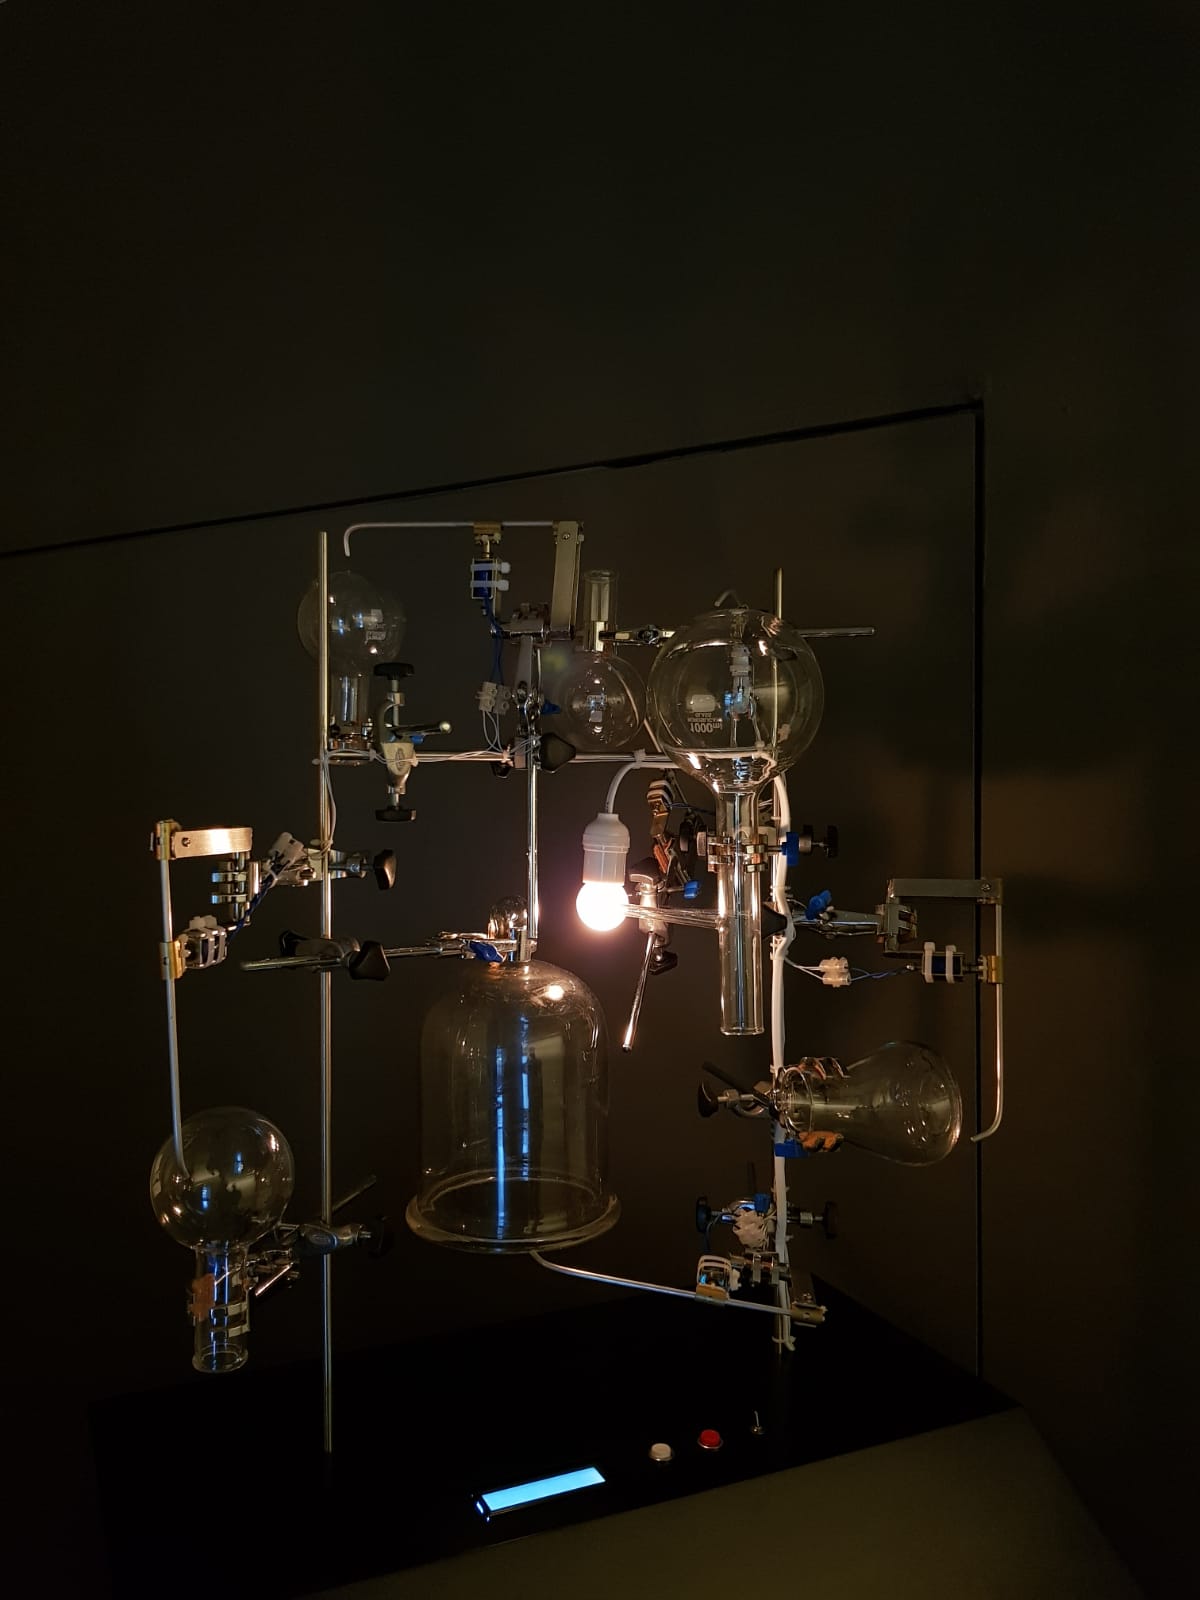  Zul MAHMOD  No Substance (Trunk) 1 to 5  (details) 2019 Solenoids, science apparatus, microcontroller, midi player and metal (10:00 mins) Dimensions variable 